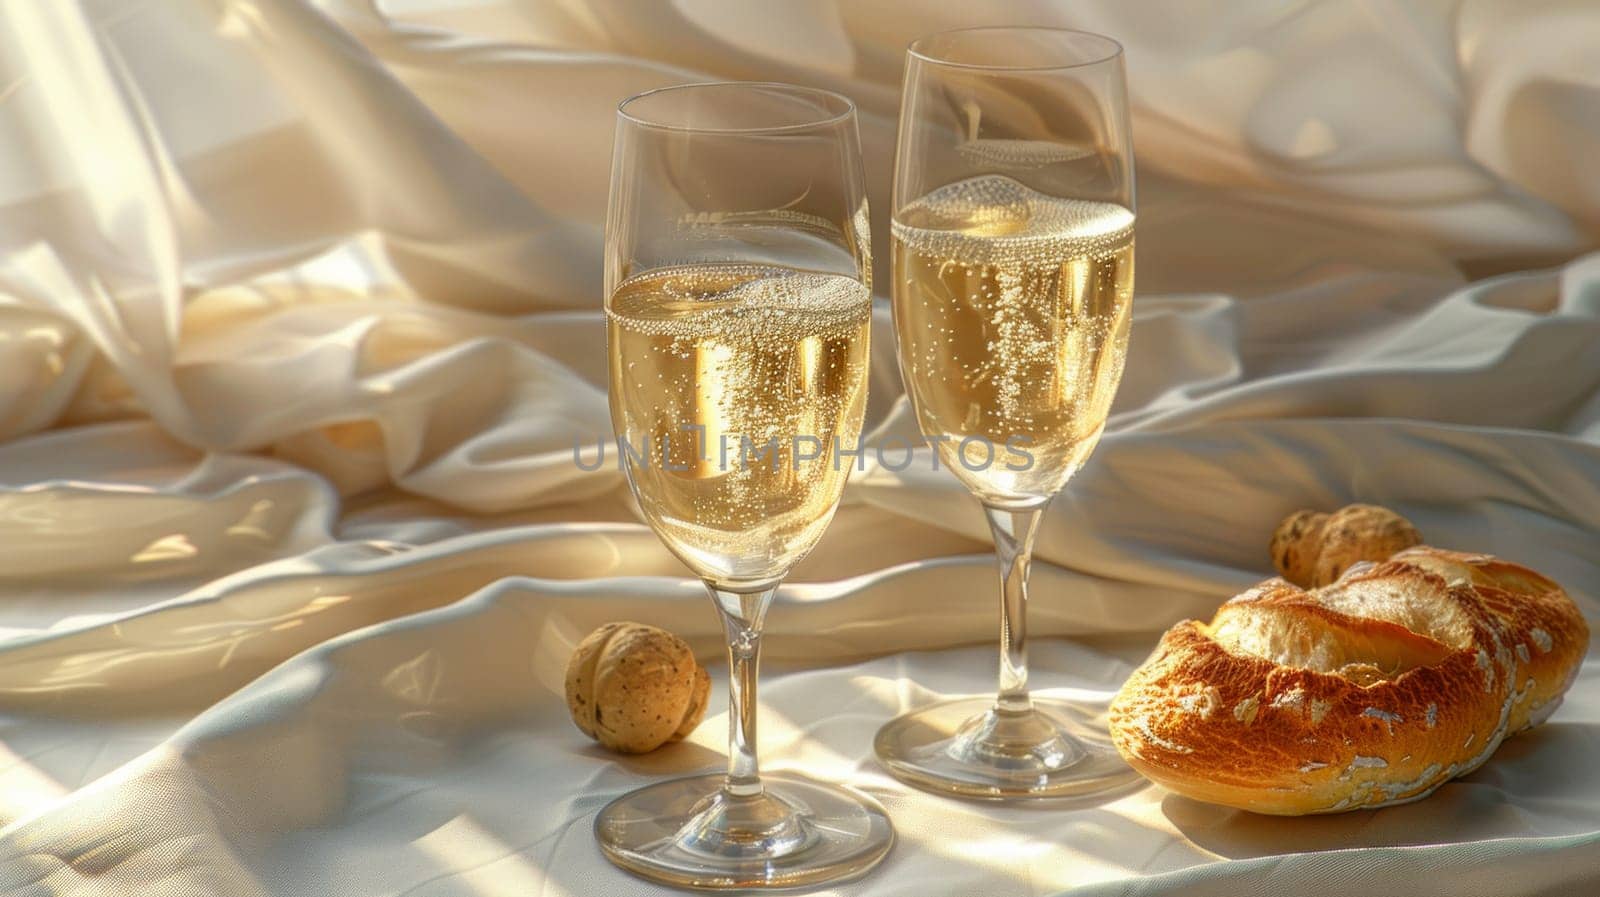 Two elegant champagne glasses and a freshly baked croissant lay gracefully on a pristine white cloth, creating a luxurious and indulgent setting.